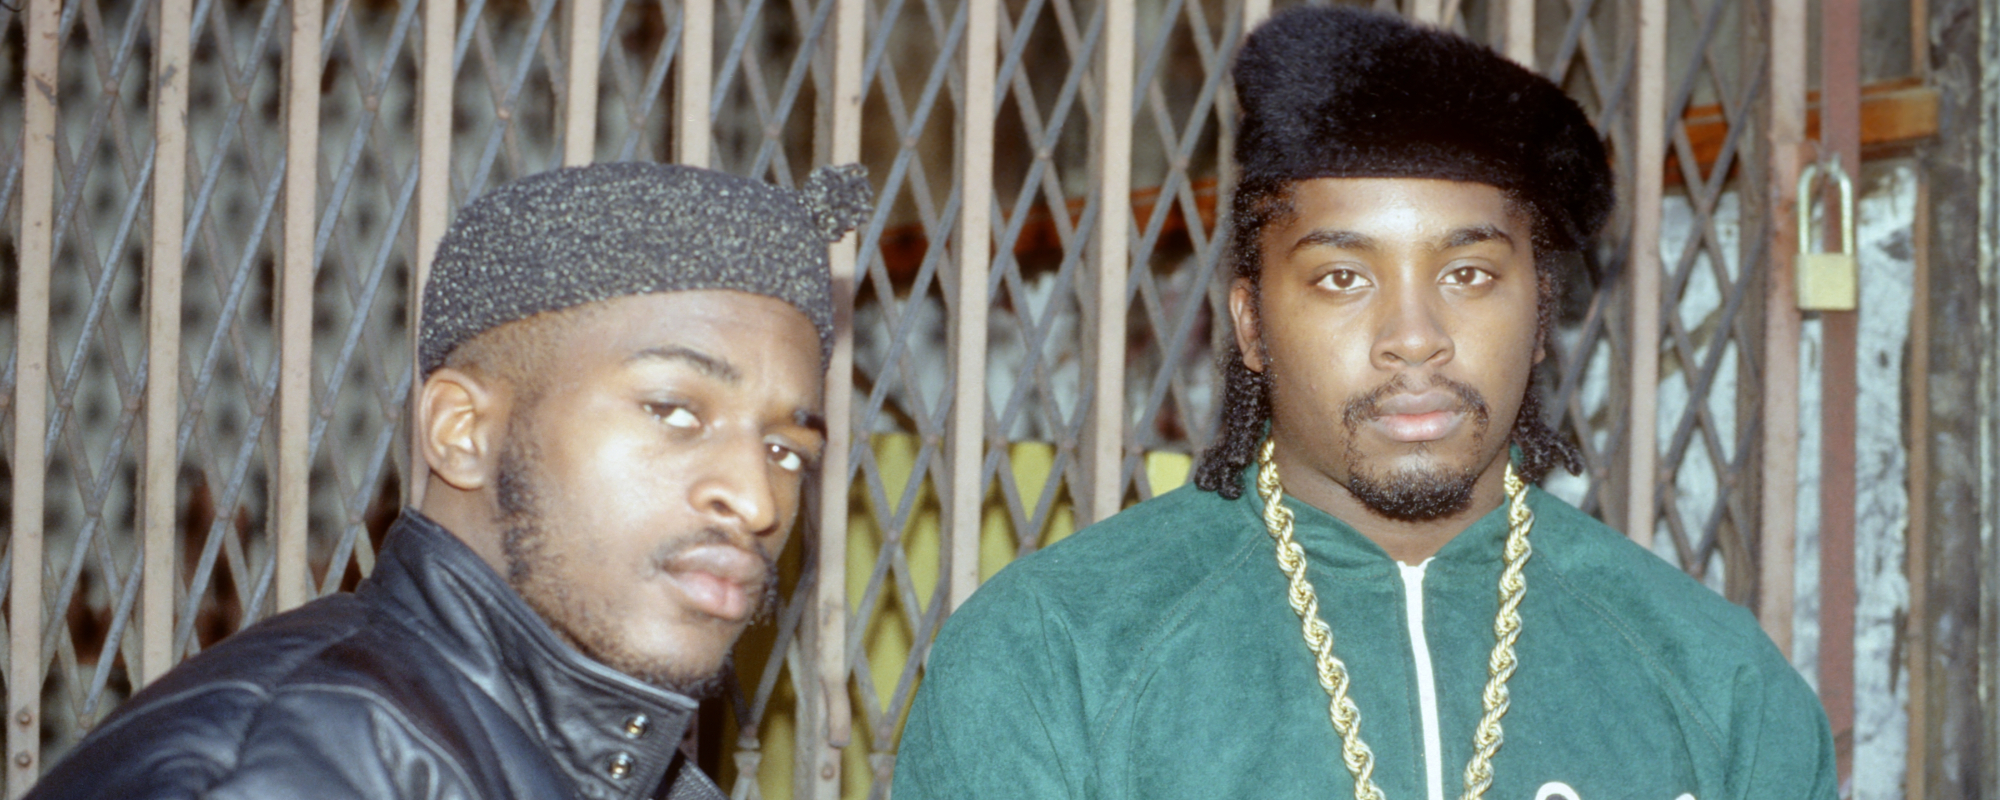 The Meaning Behind “Follow the Leader” by Eric B. & Rakim and How They Shattered Preconceived Notions of What Hip-Hop Could Be